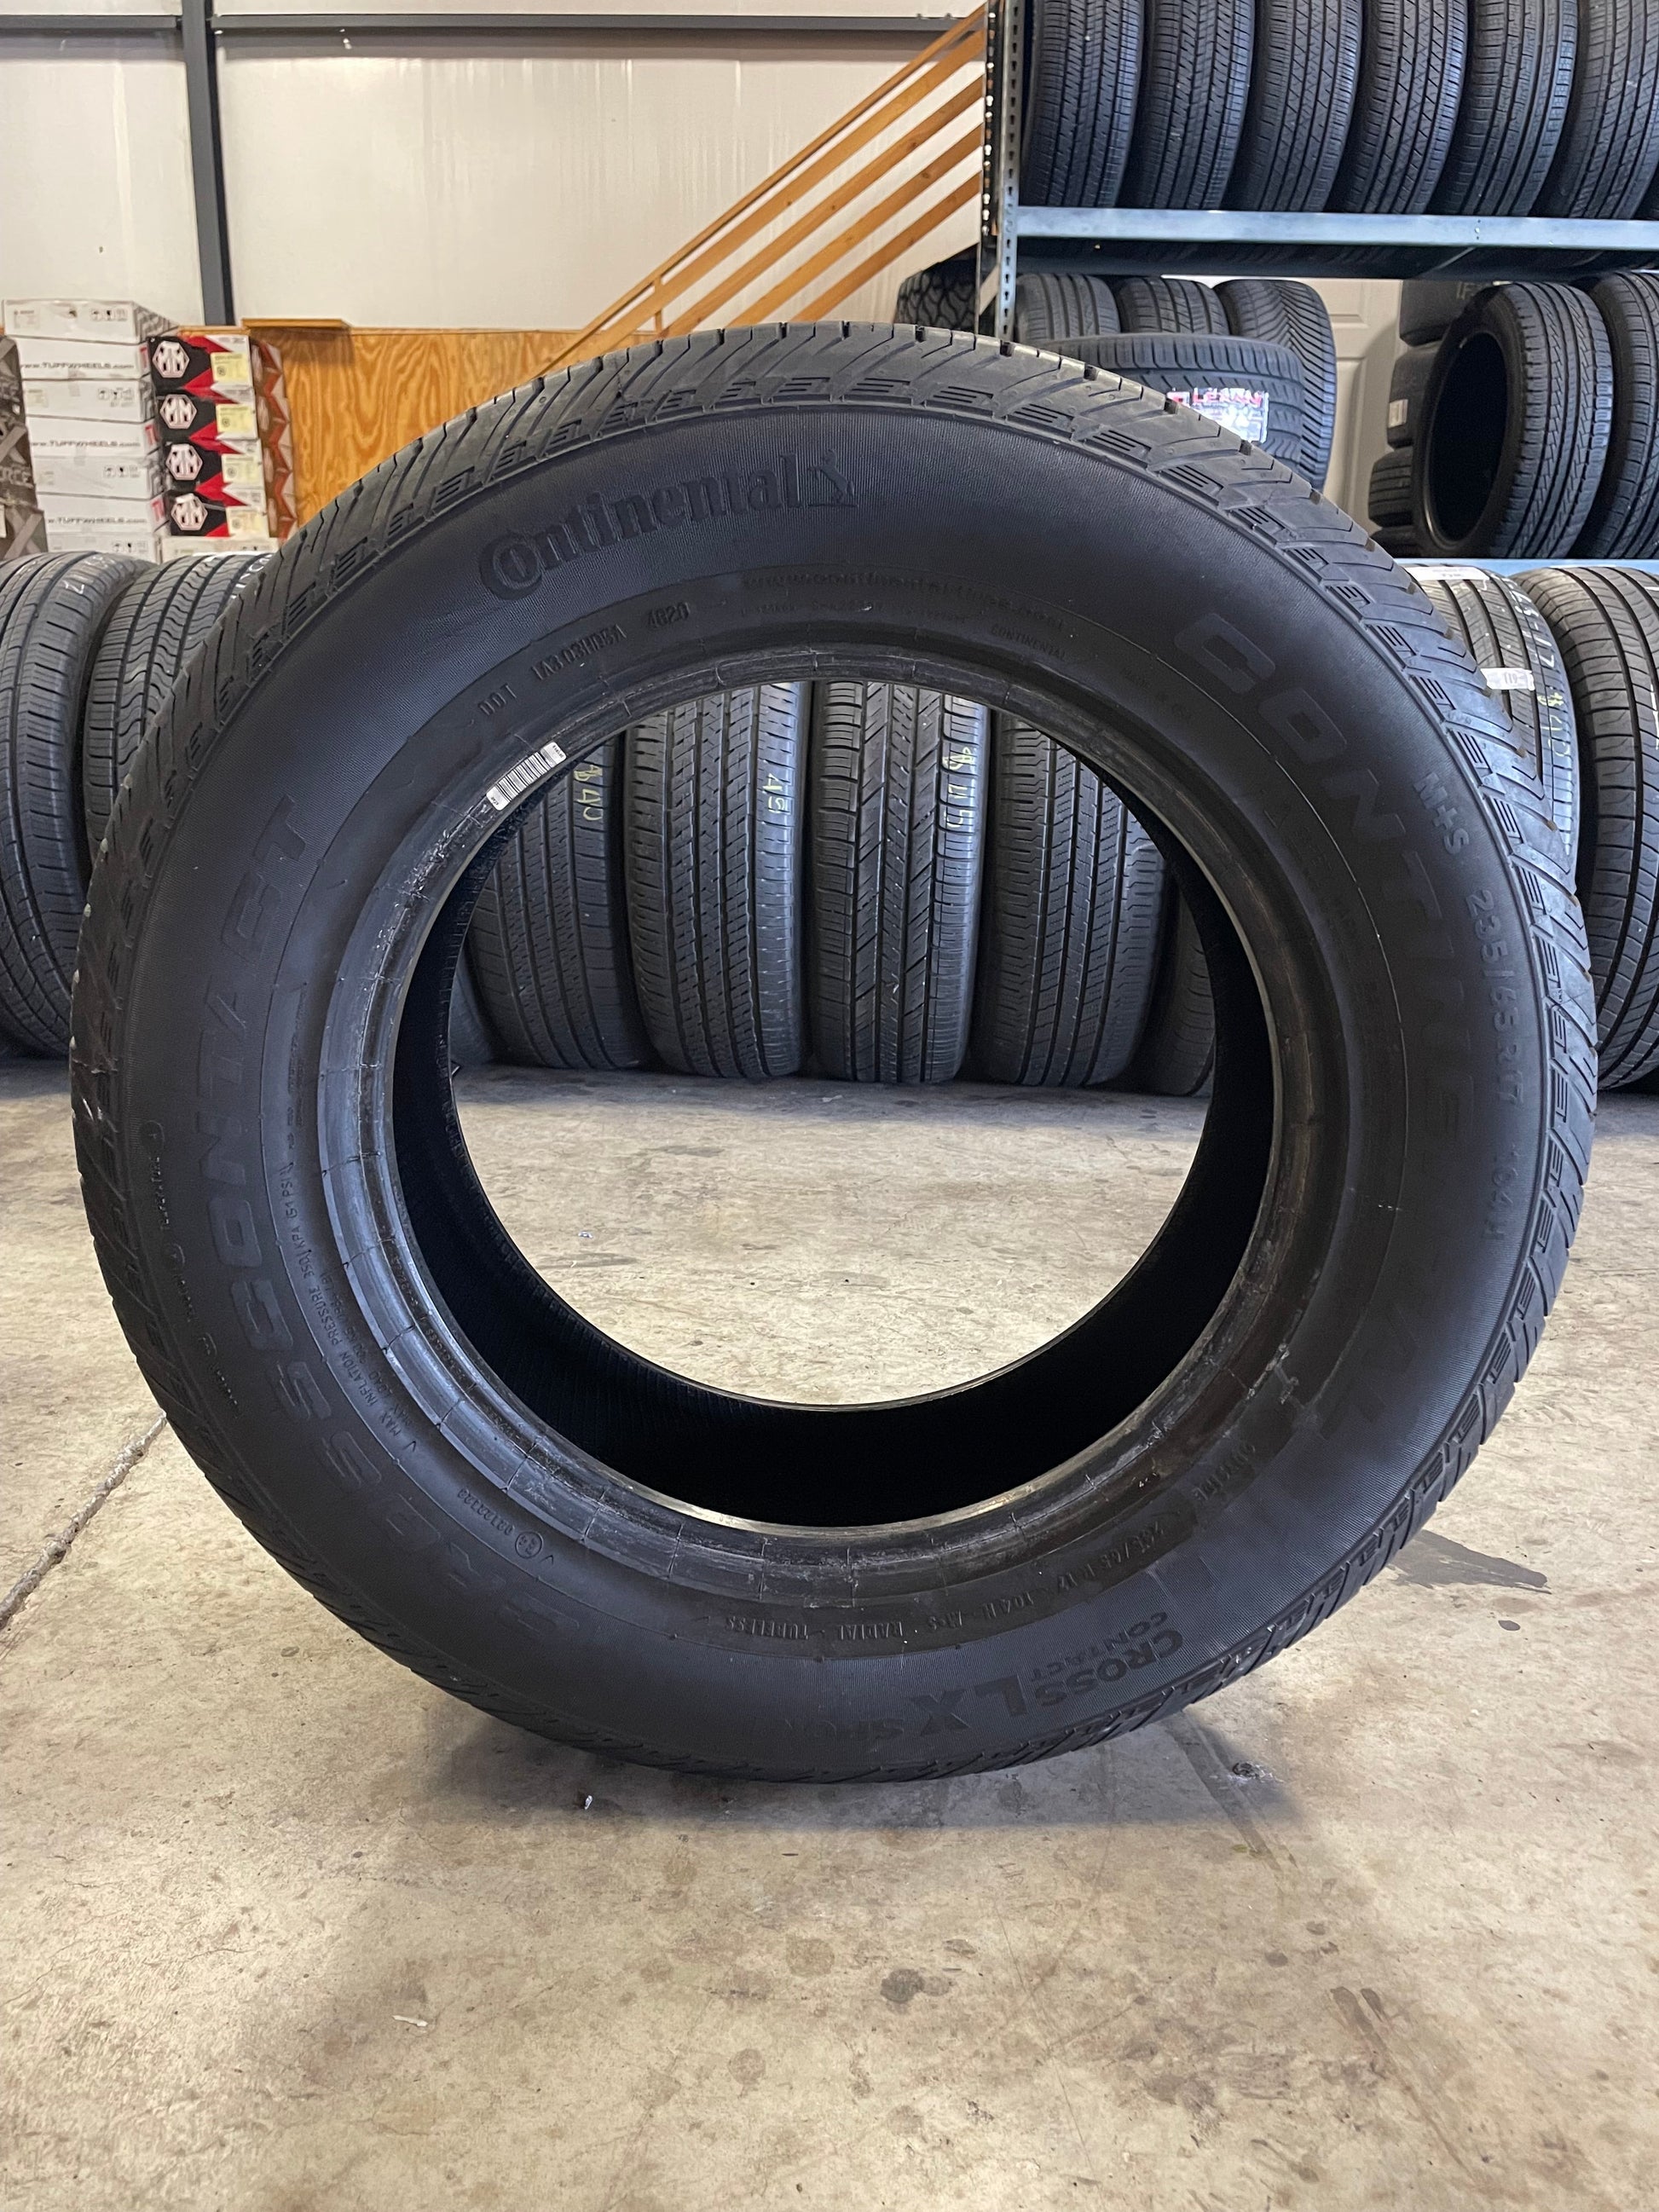 SINGLE 235/65R17 Continental Crosscontact LX Sport 104 H SL - Premium Used Tires